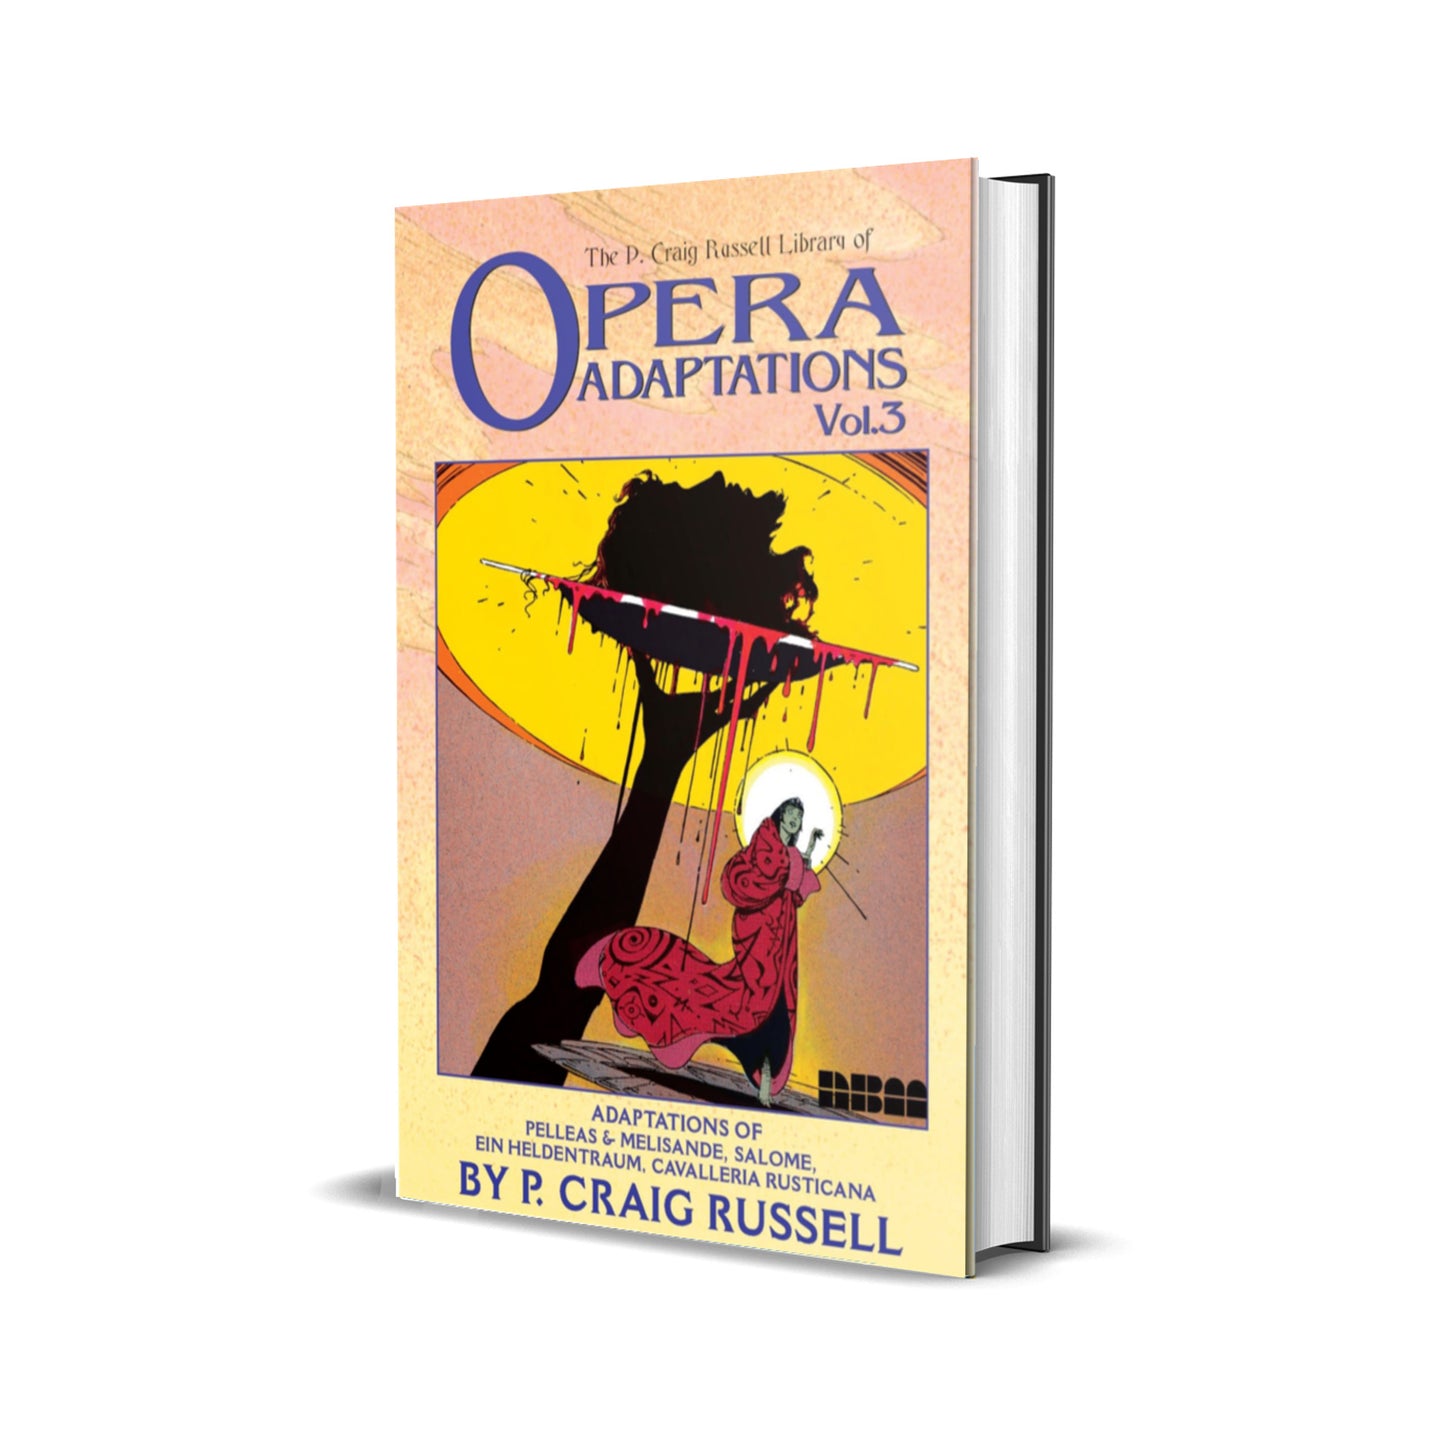 The P. Craig Russell Library of Opera Adaptations, Vol. 3